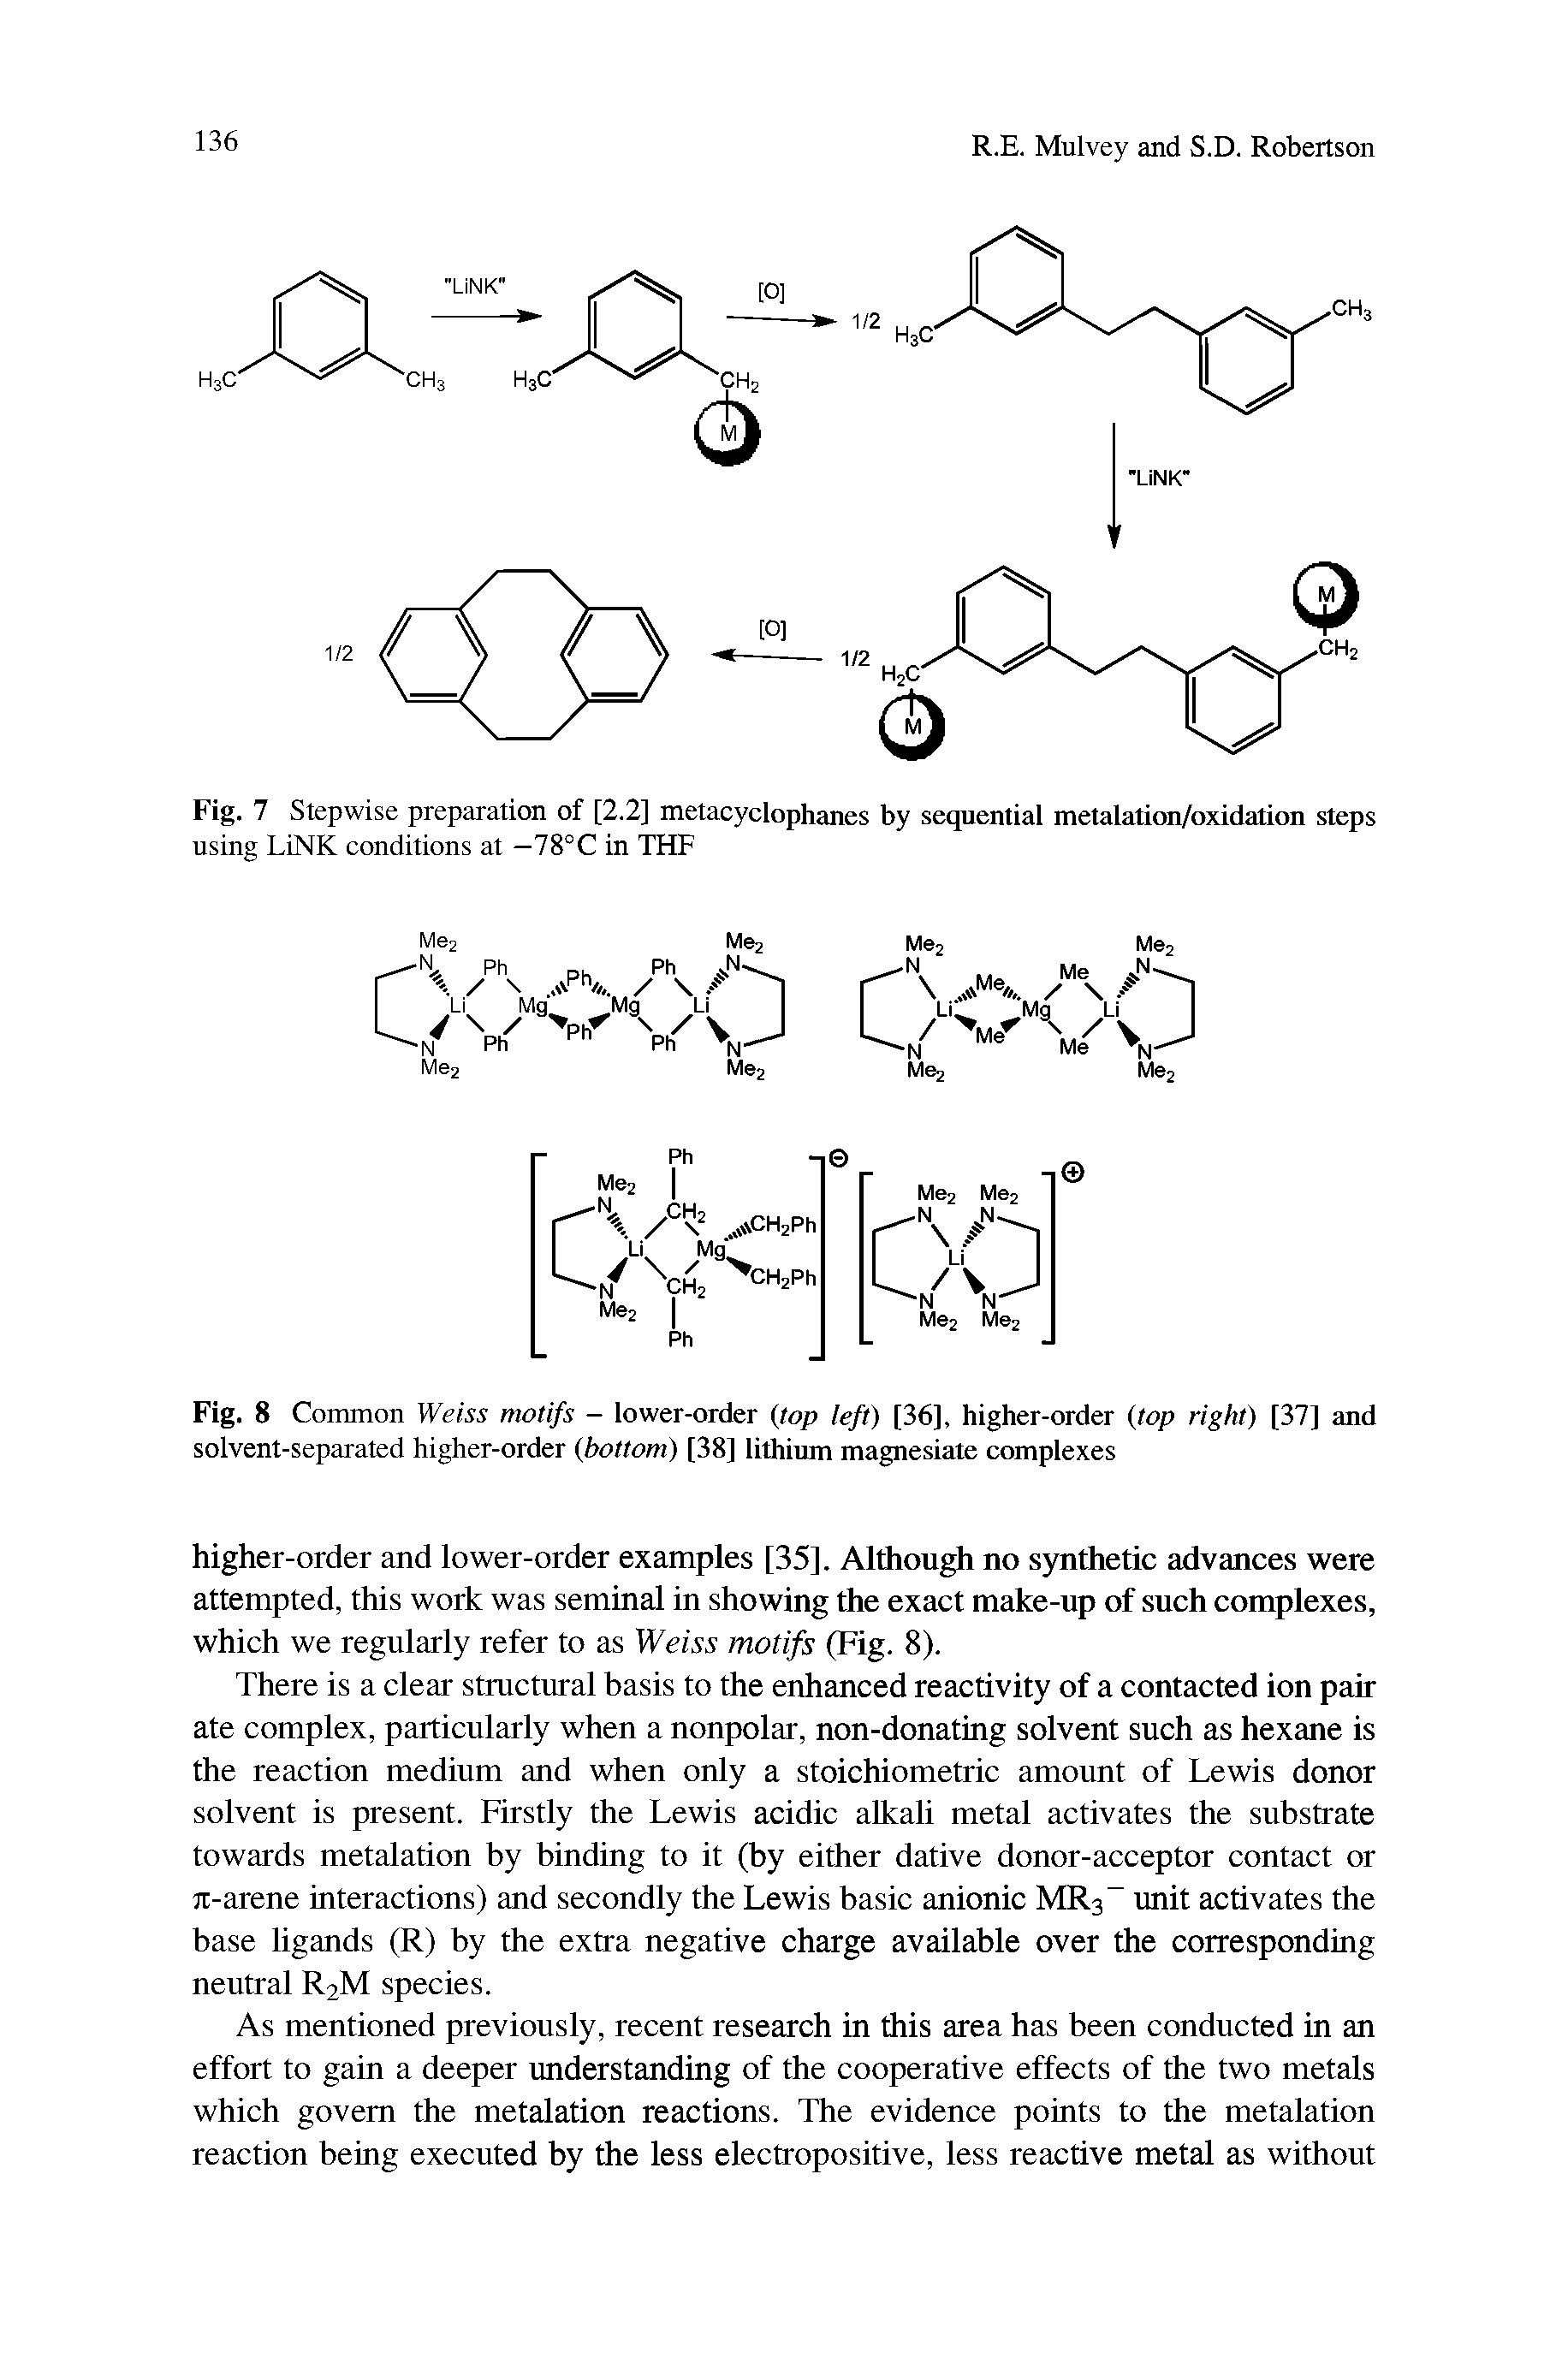 Fig. 8 Common Weiss motifs - lower-order (top left) [36], higher-order (top right) [37] and solvent-separated higher-order (bottom) [38] lithium magnesiate complexes...